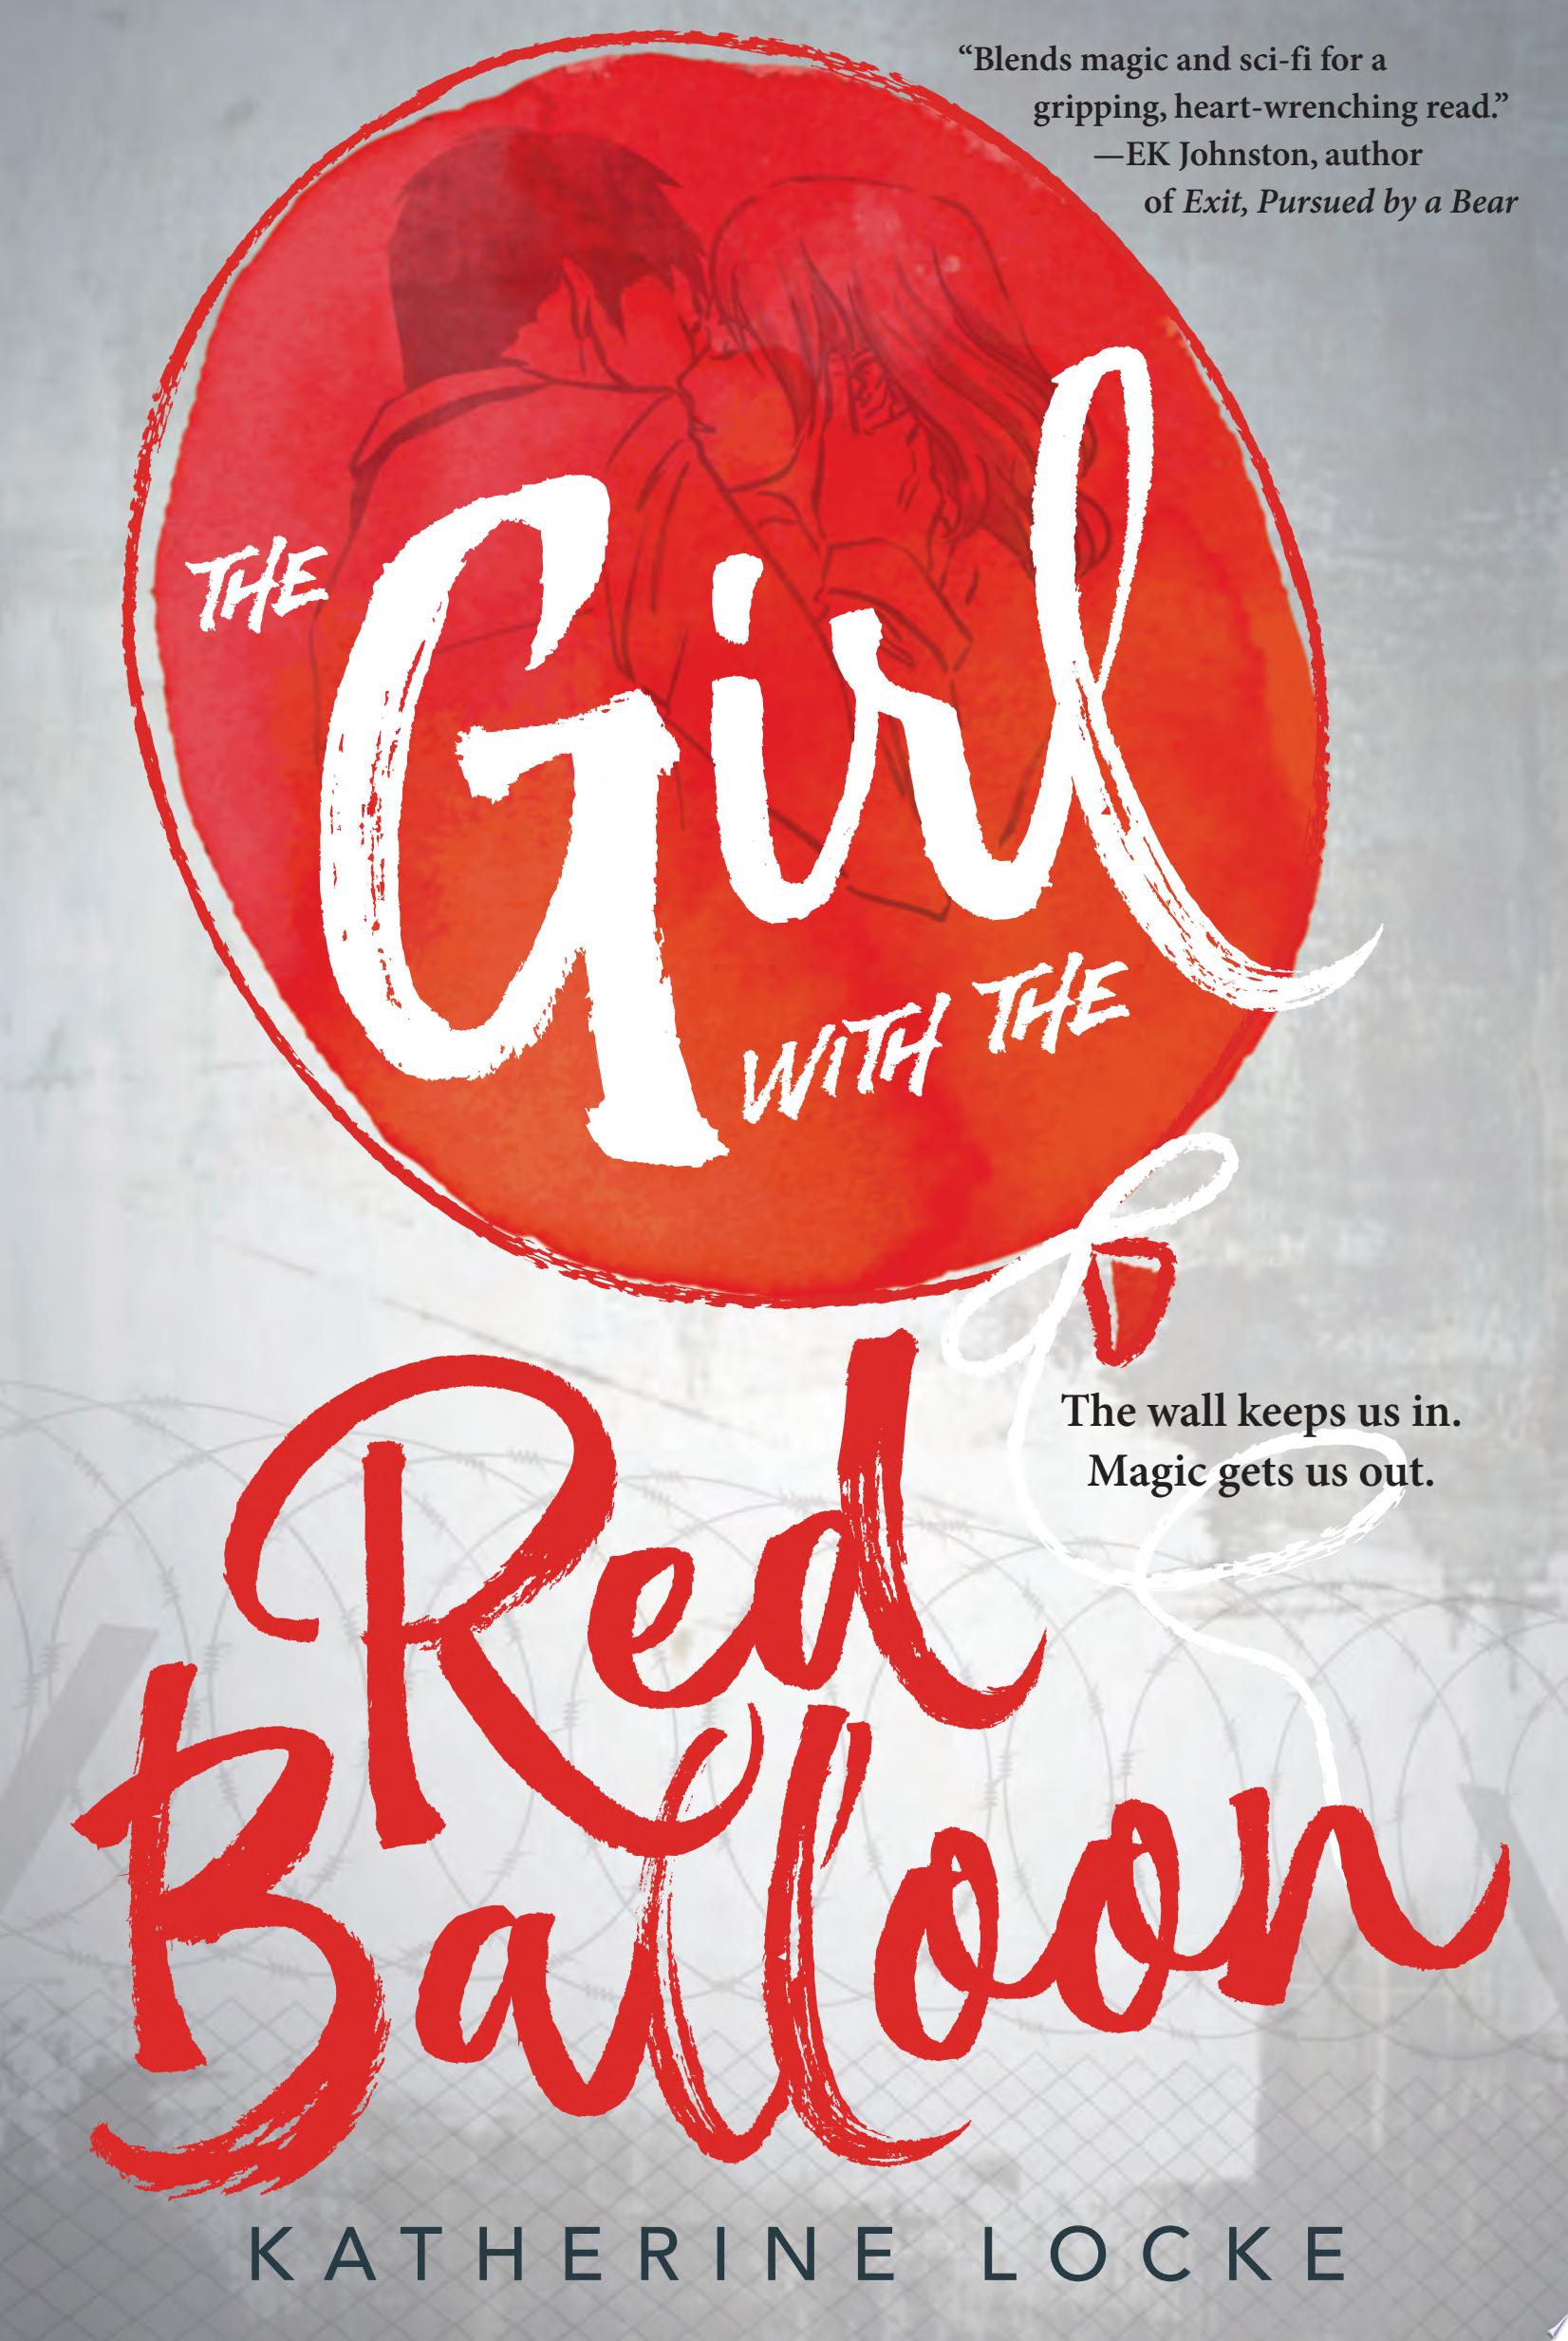 Image for "The Girl with the Red Balloon"